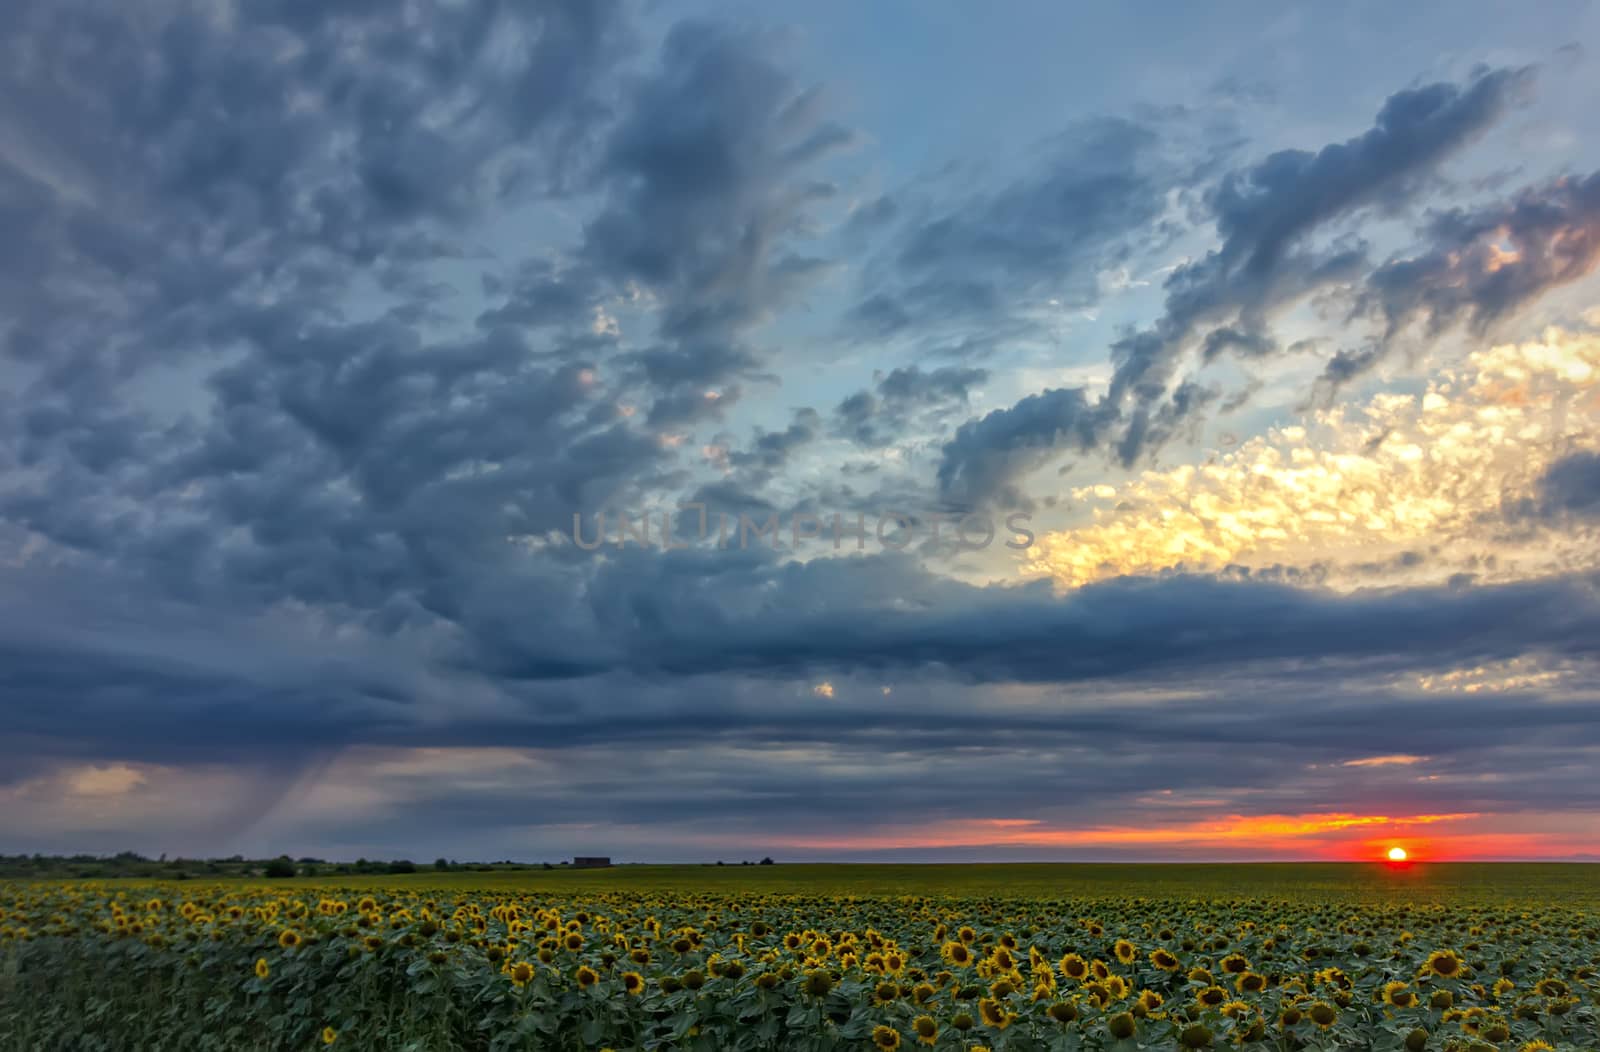 The exciting landscape of a sunflower field at stormy clouds at sunset